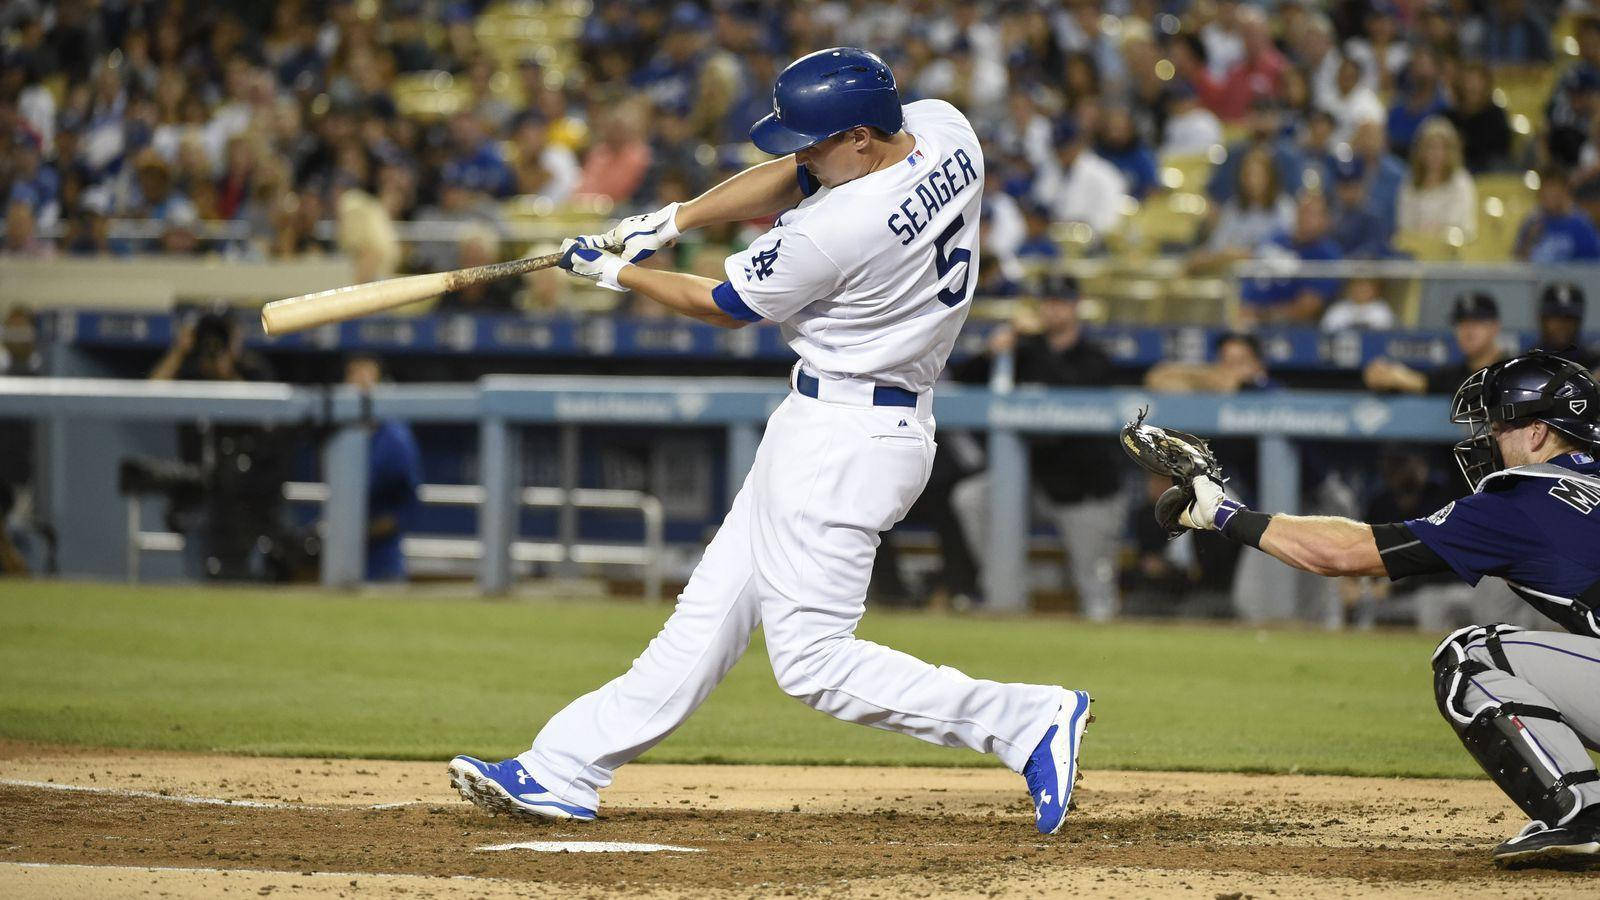 Corey Seager Swinging While Skipping